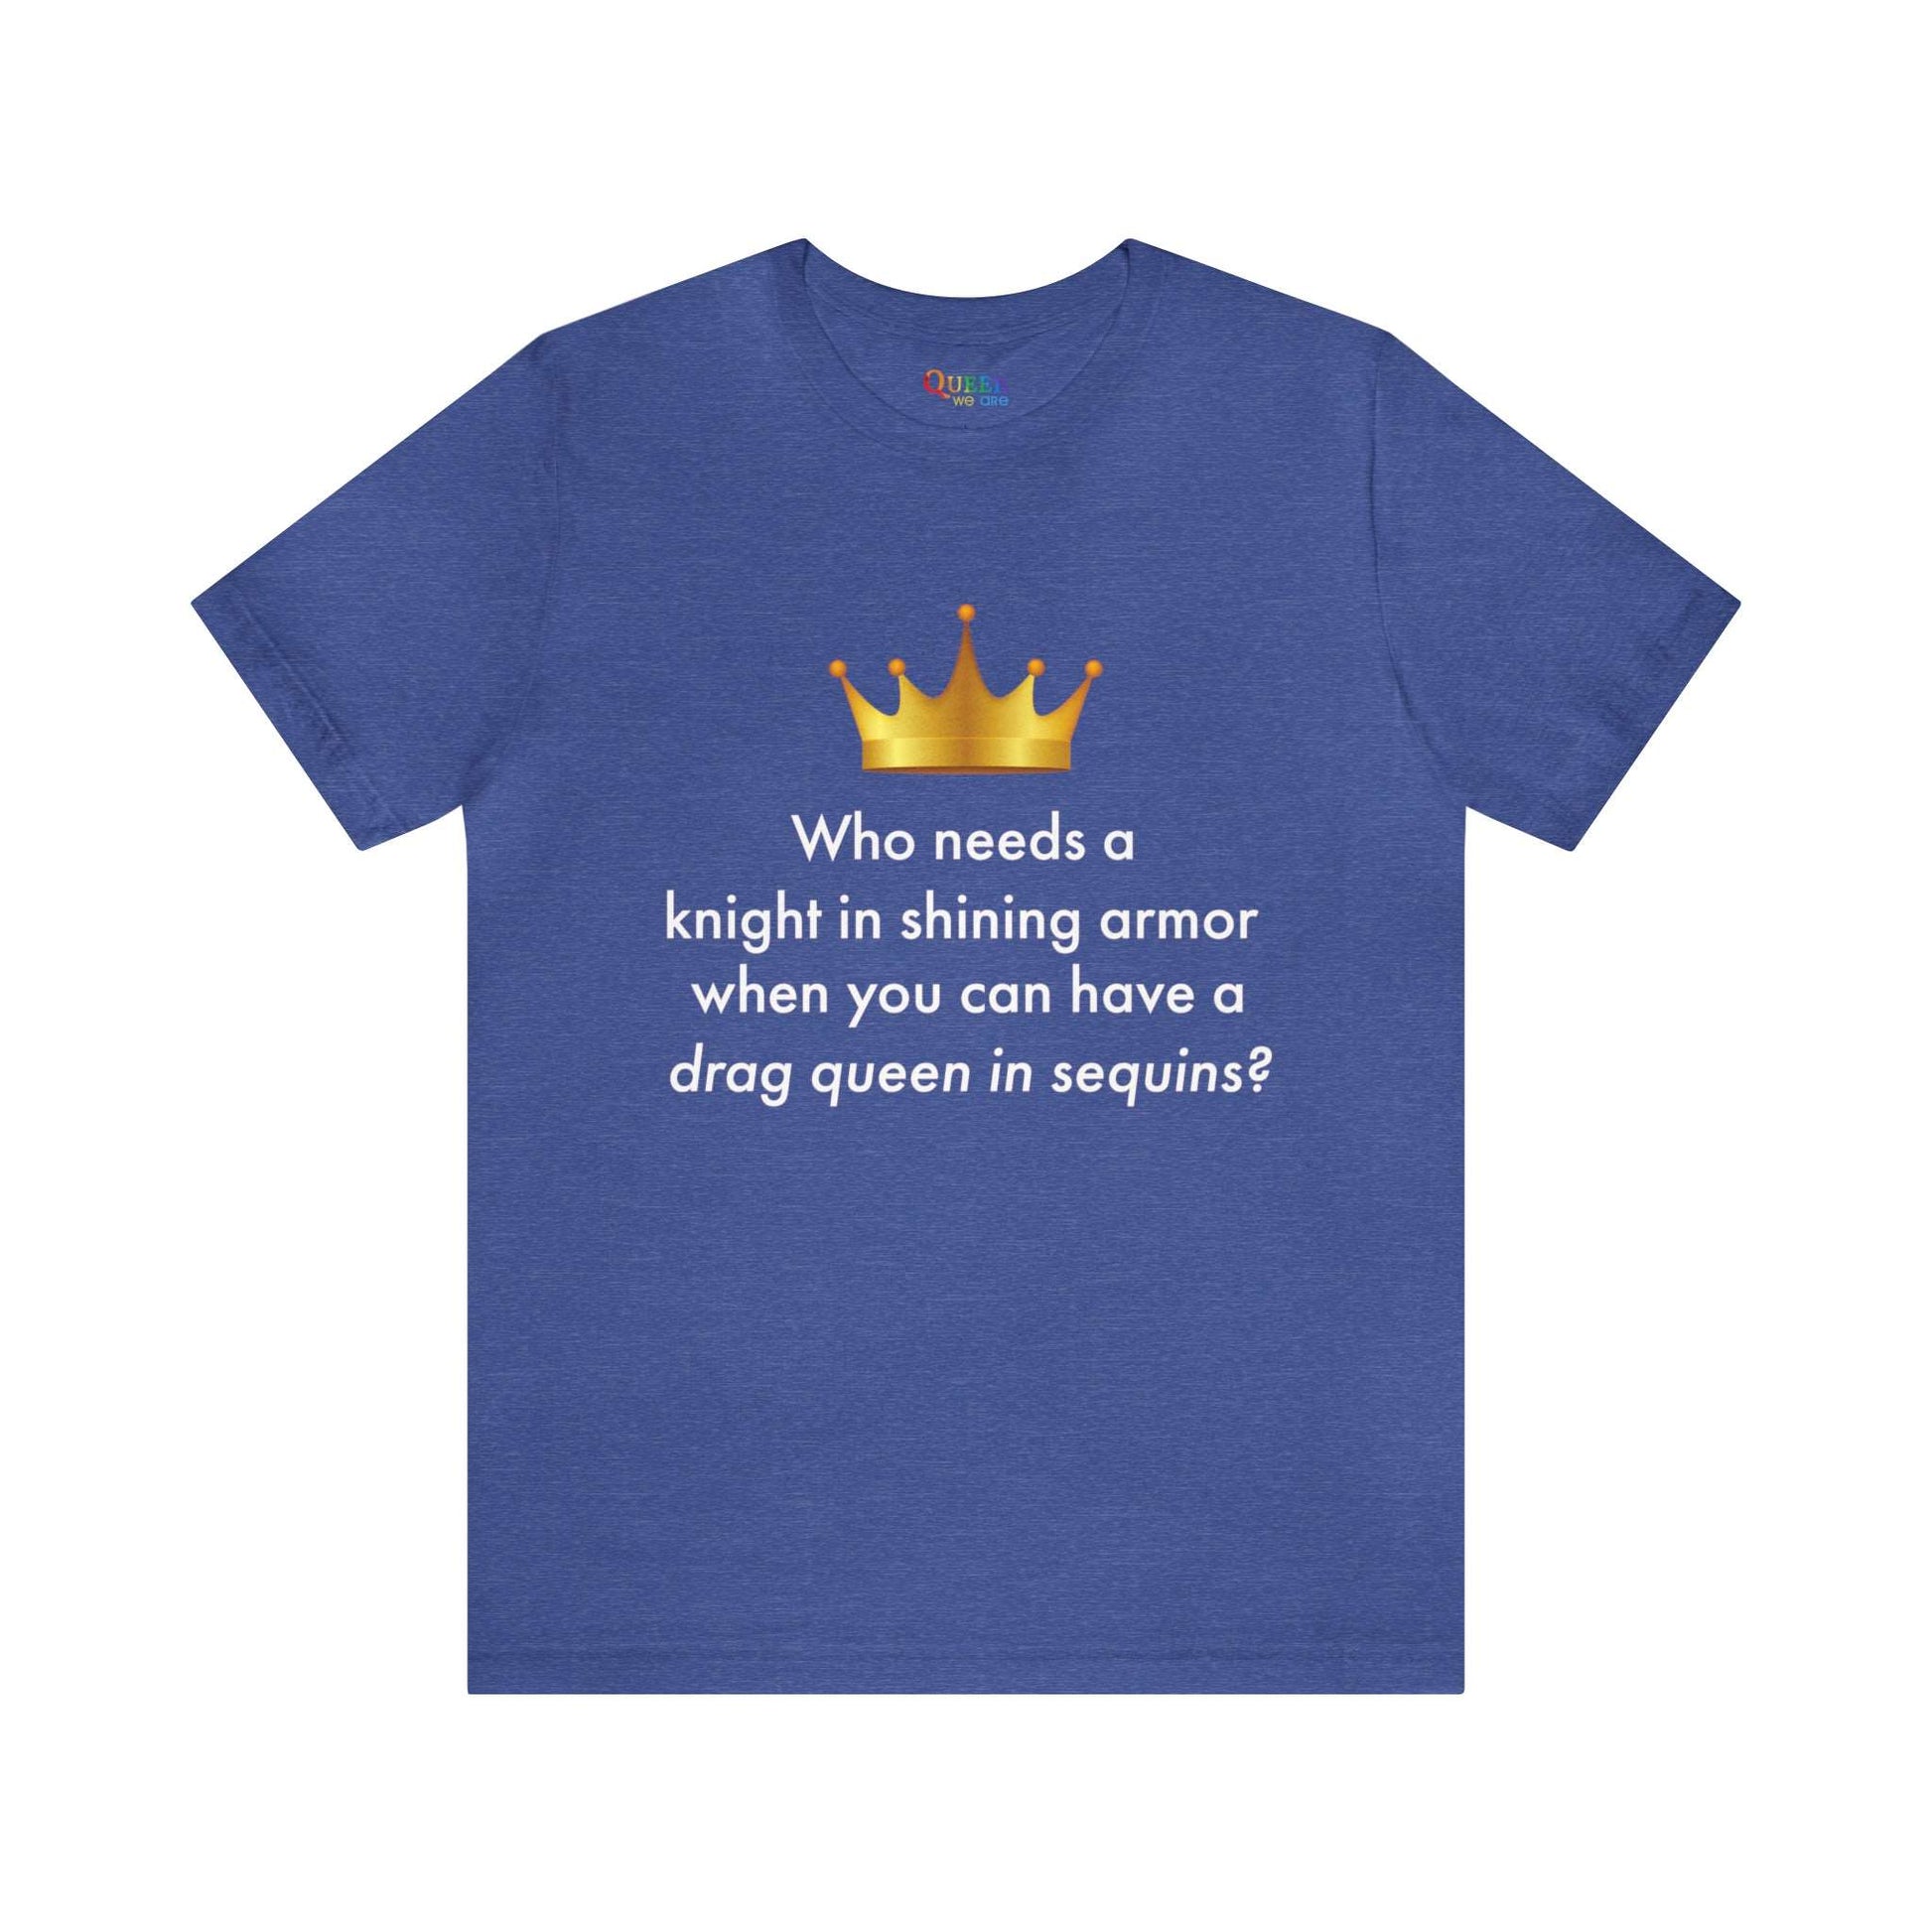 Who Needs a Knight in Shining Armor When You Can Have a Drag Queen in Sequins? Unisex T-shirt - Queer We Are Shop